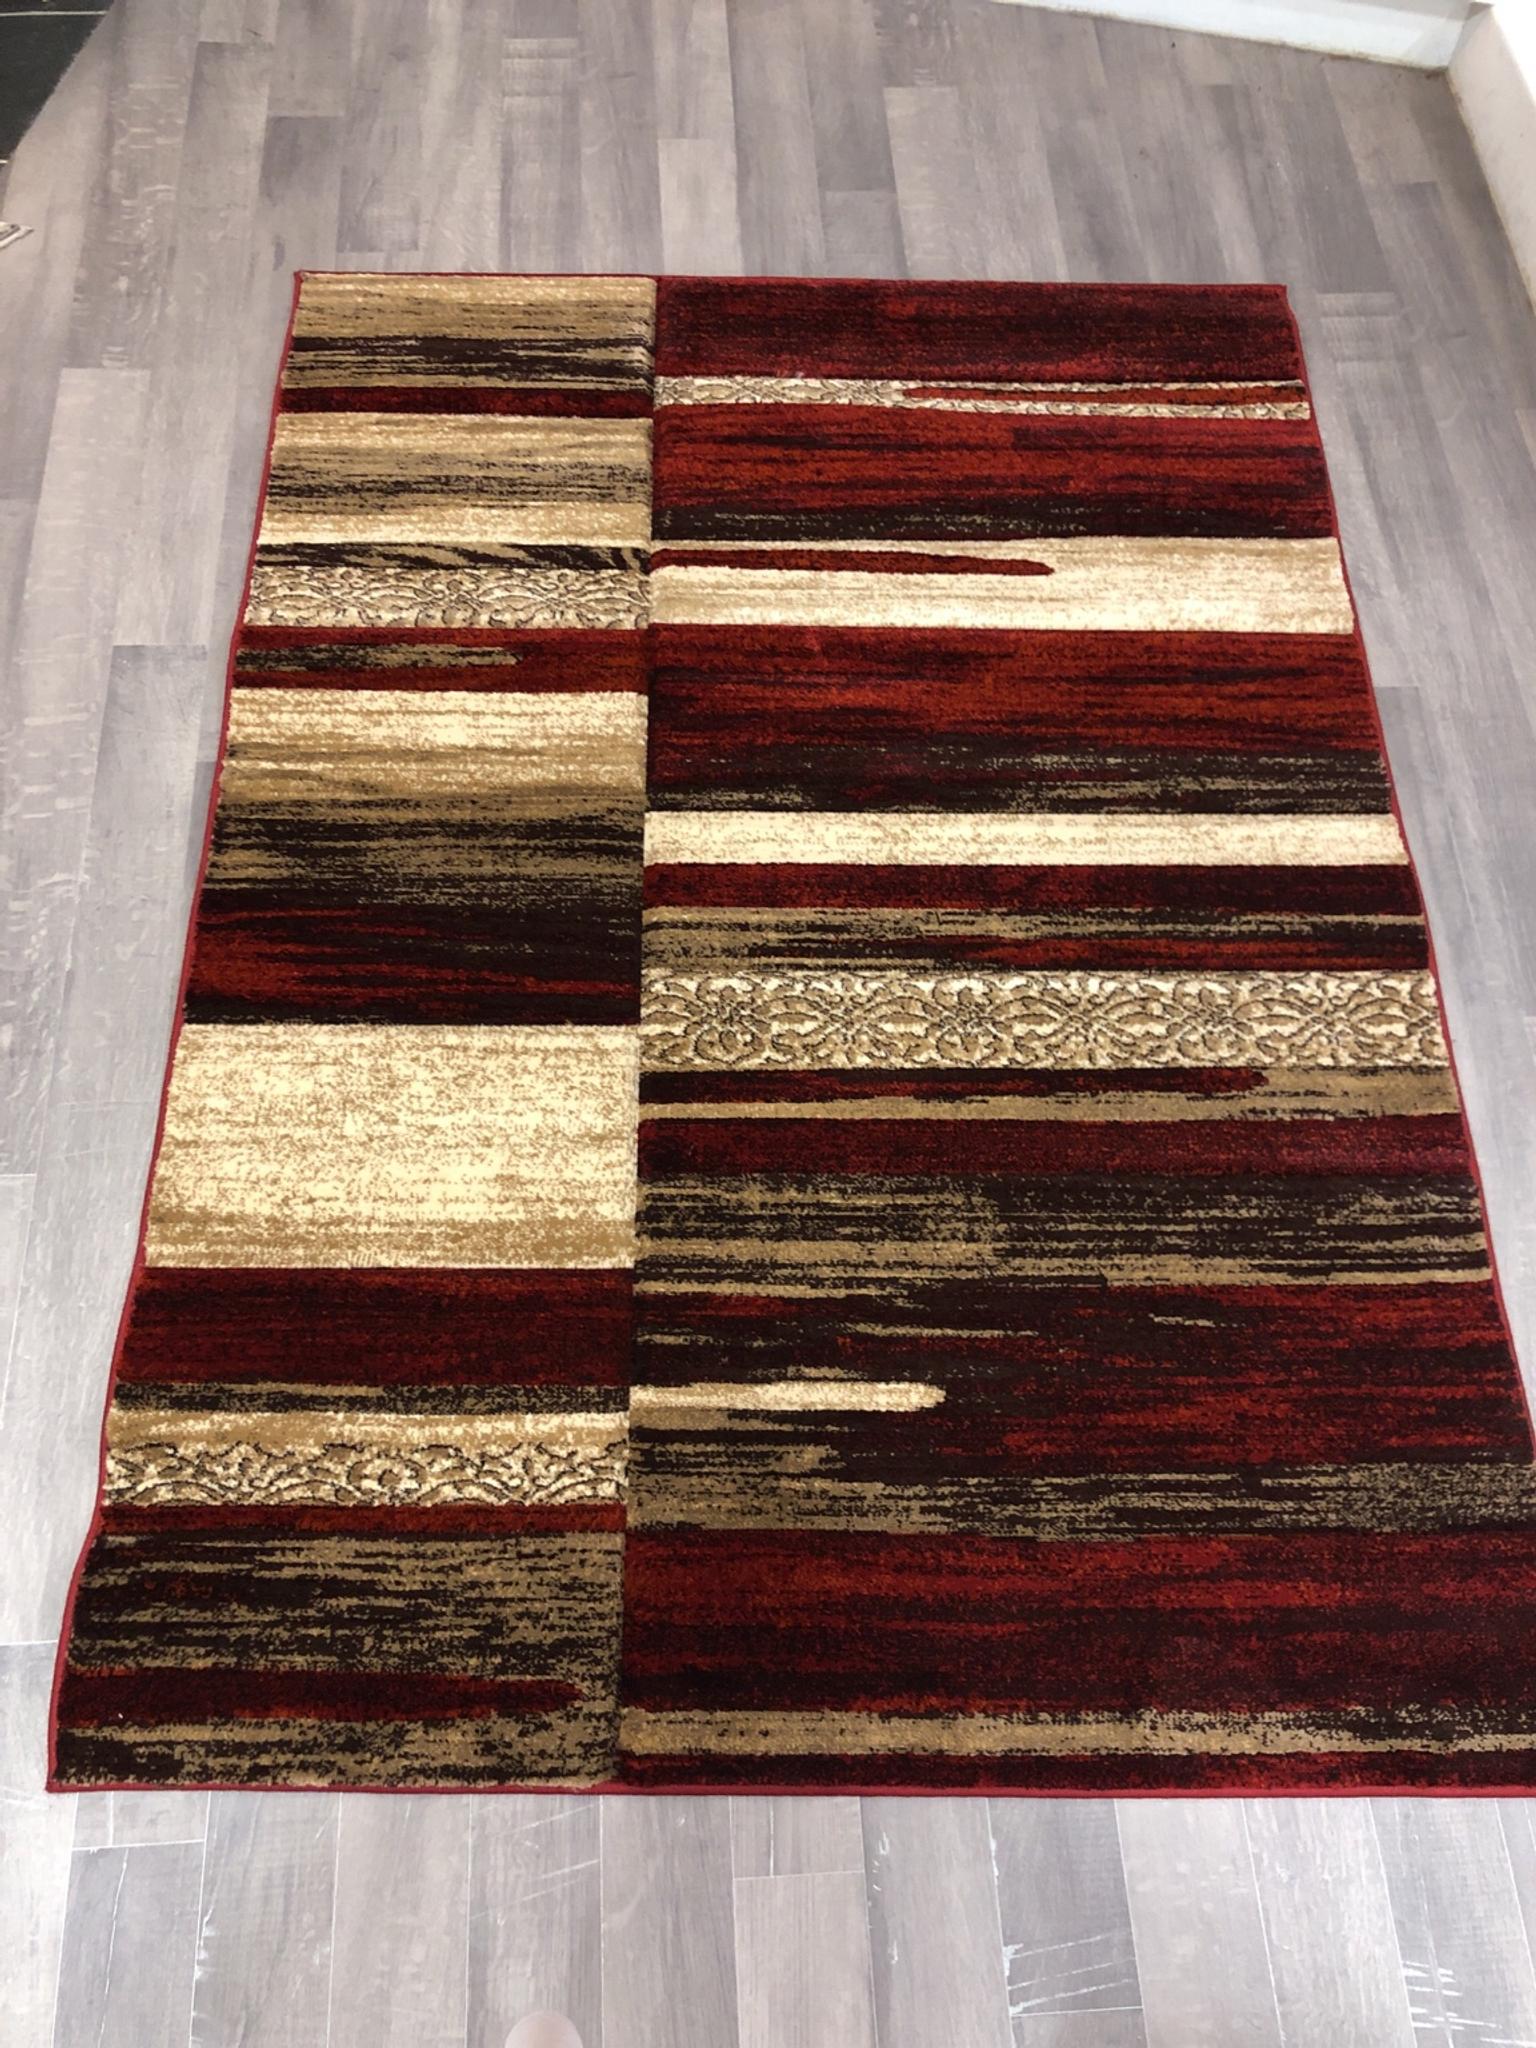 Brand New Rug Good Quality In Lu1 Luton, What Is A Good Quality Rug Made Of